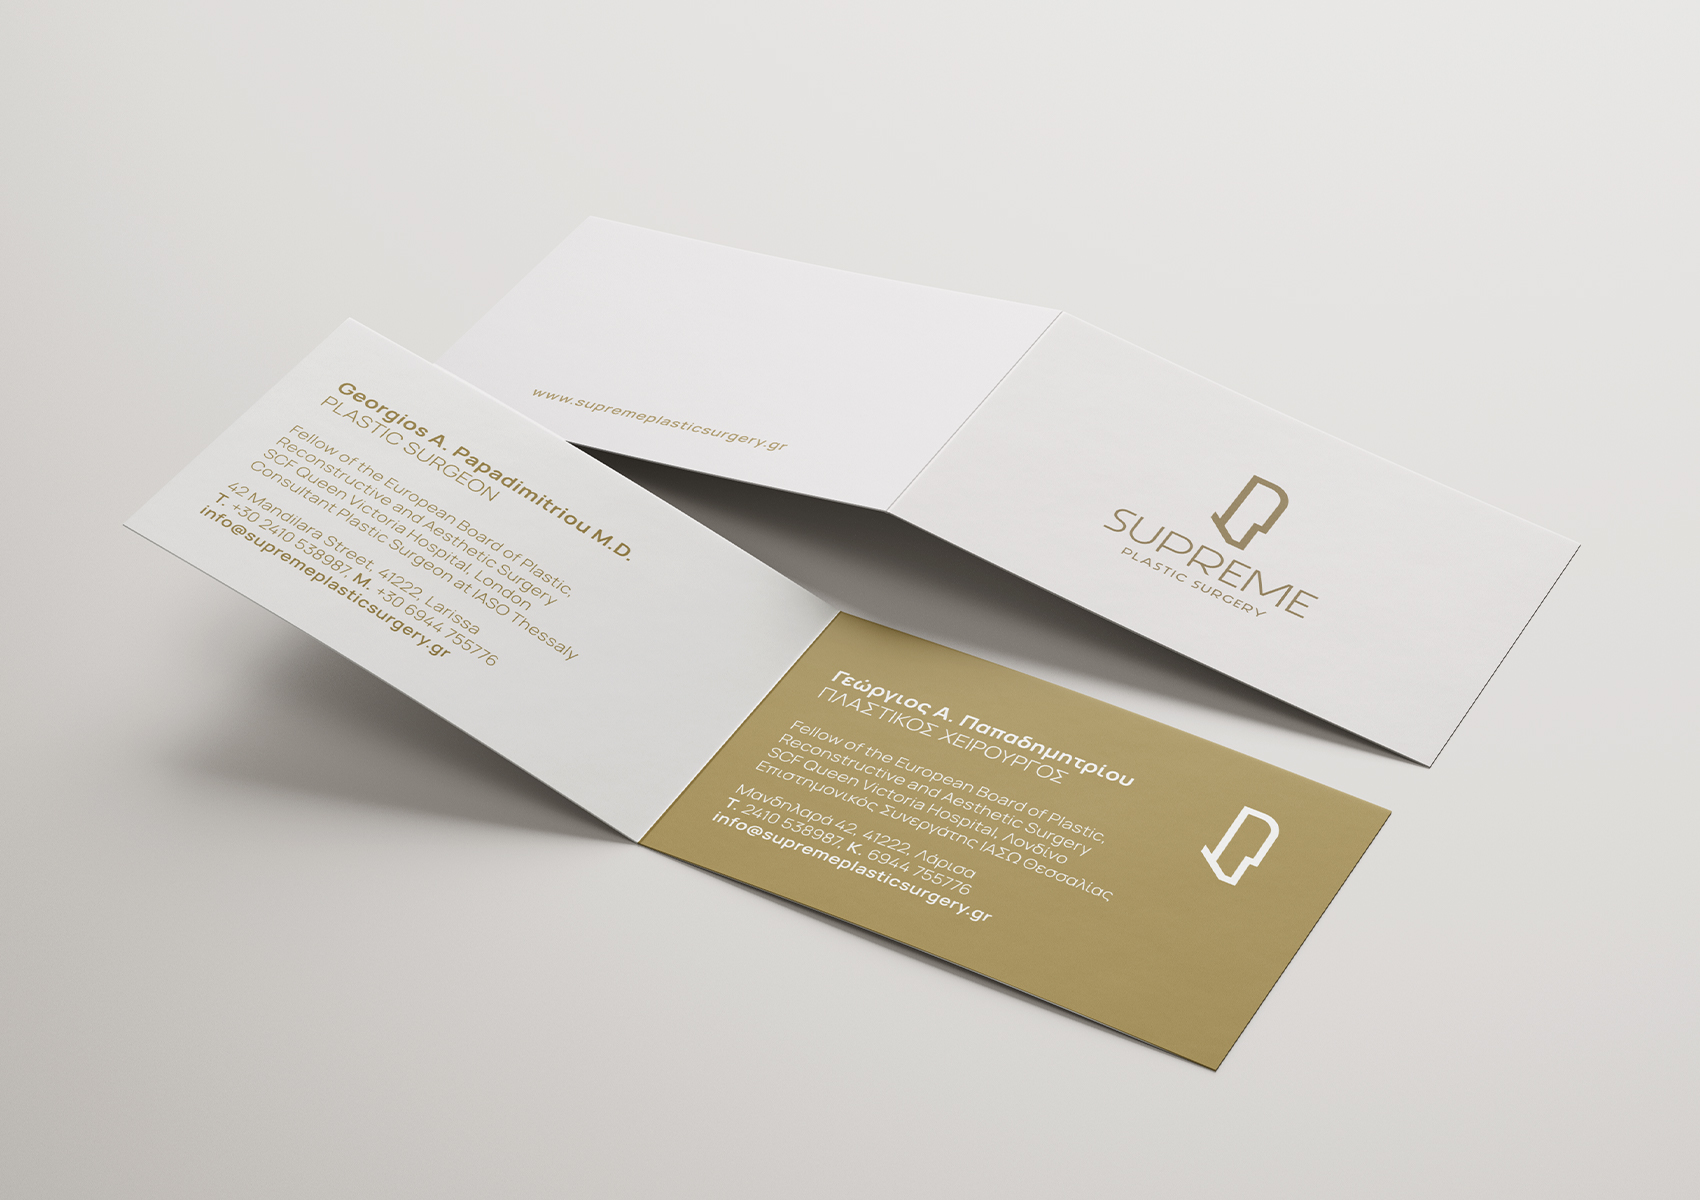 Supreme Plastic Surgery cards2 1700x1200 by xhristakis